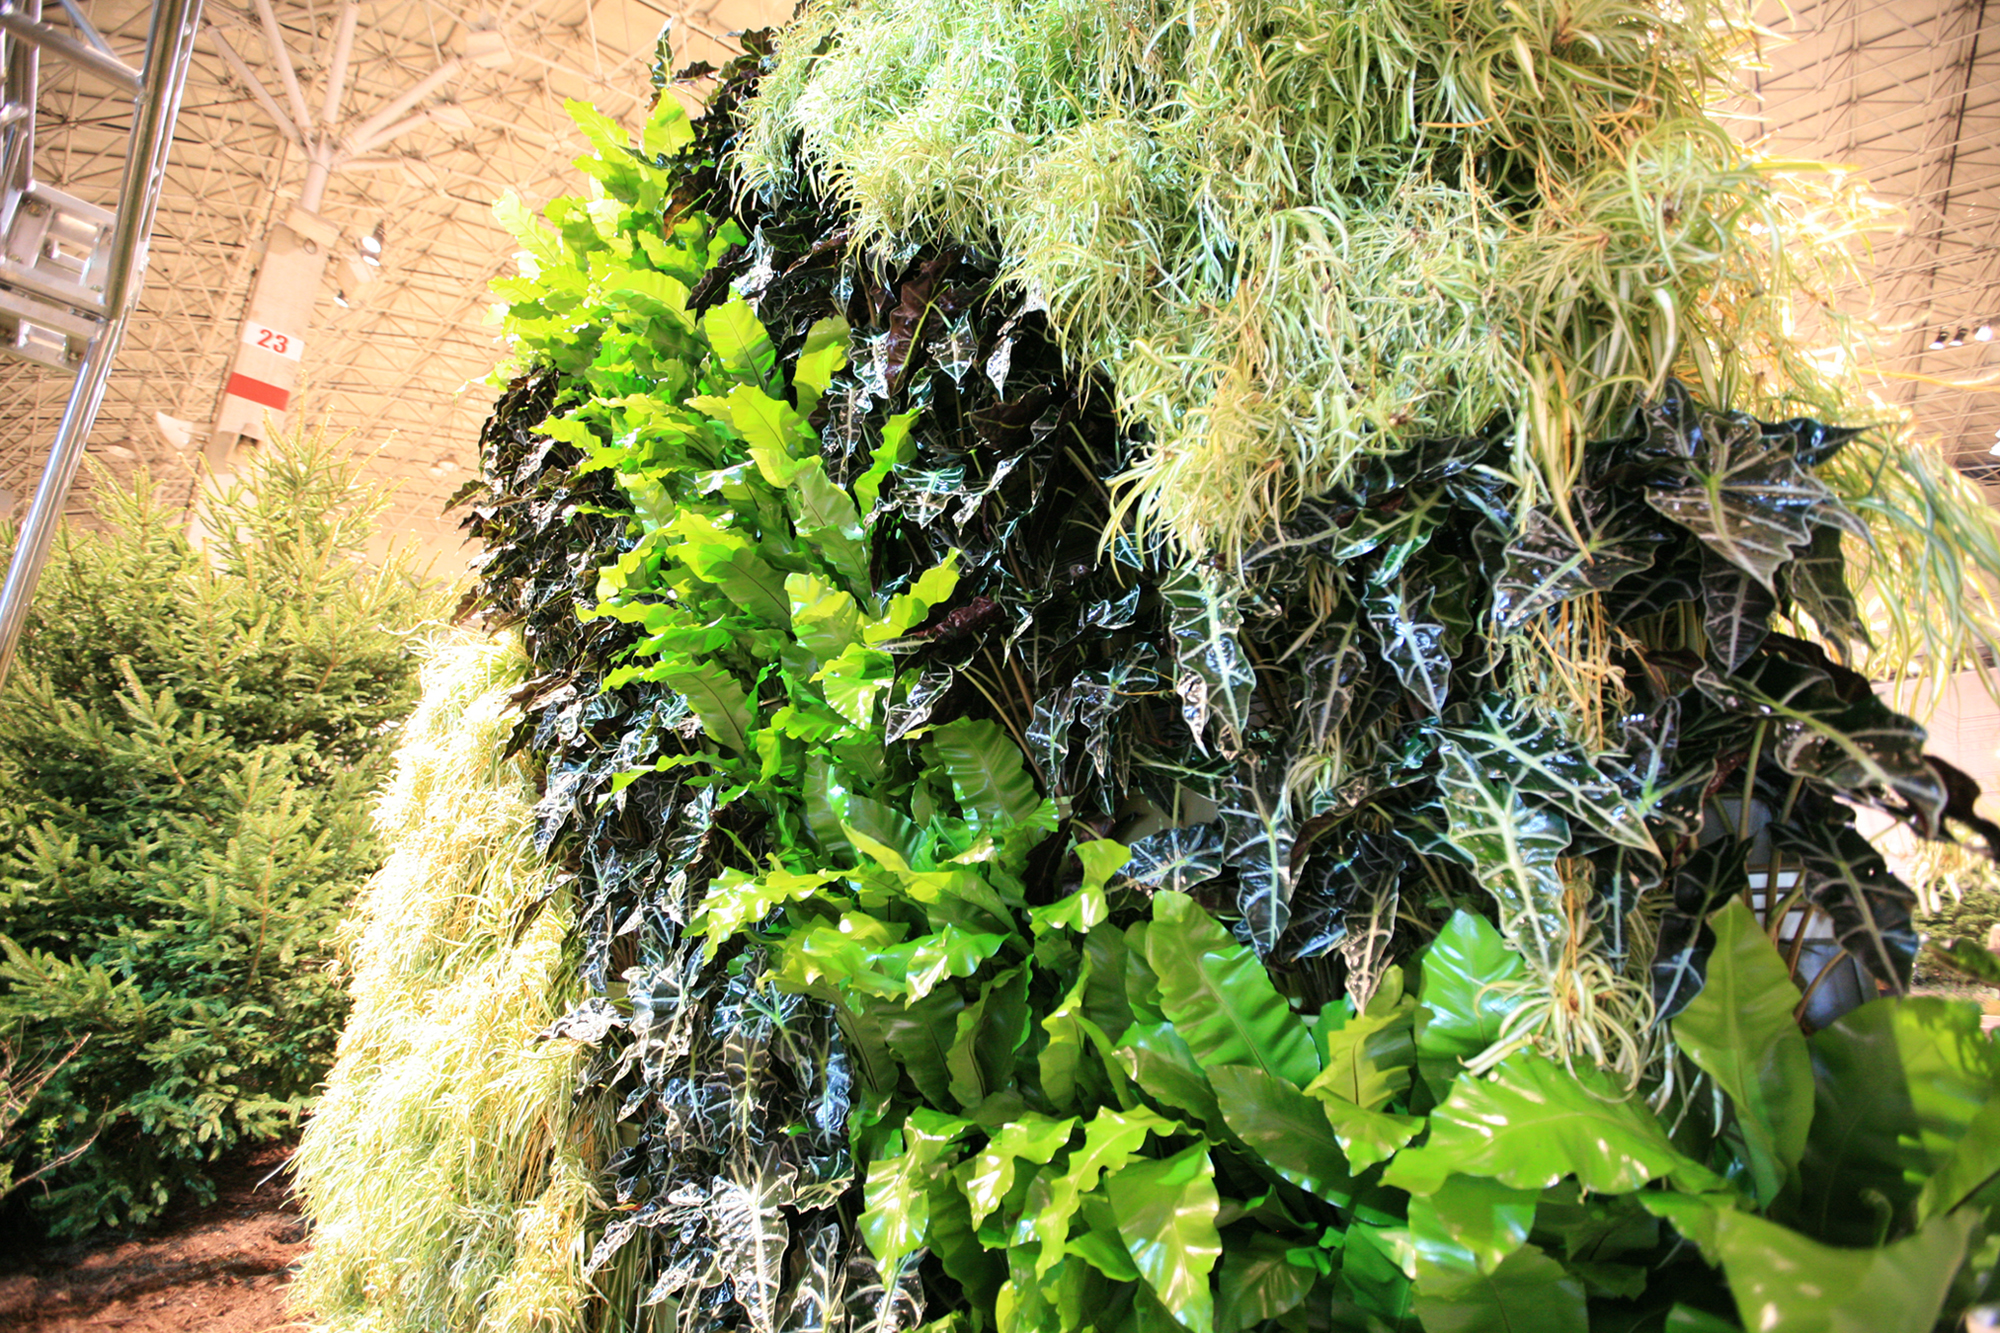 Living Wall Displays from 2013 Chicago Flower & Garden Show.  In 2014, new living wall designs will be featured throughout this and several other Great Lakes home shows.